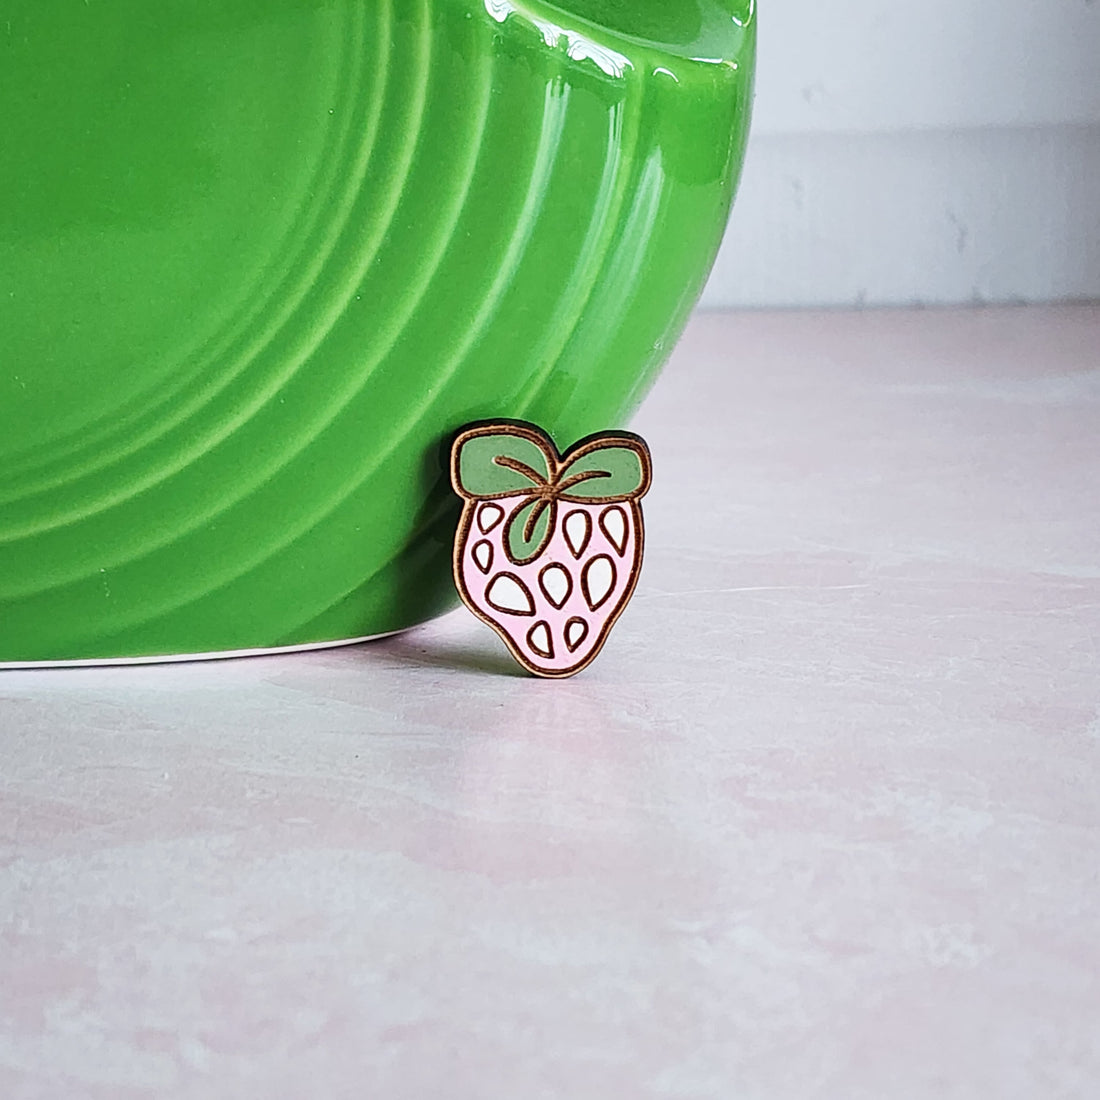 ink and green strawberry pin in front of a green case